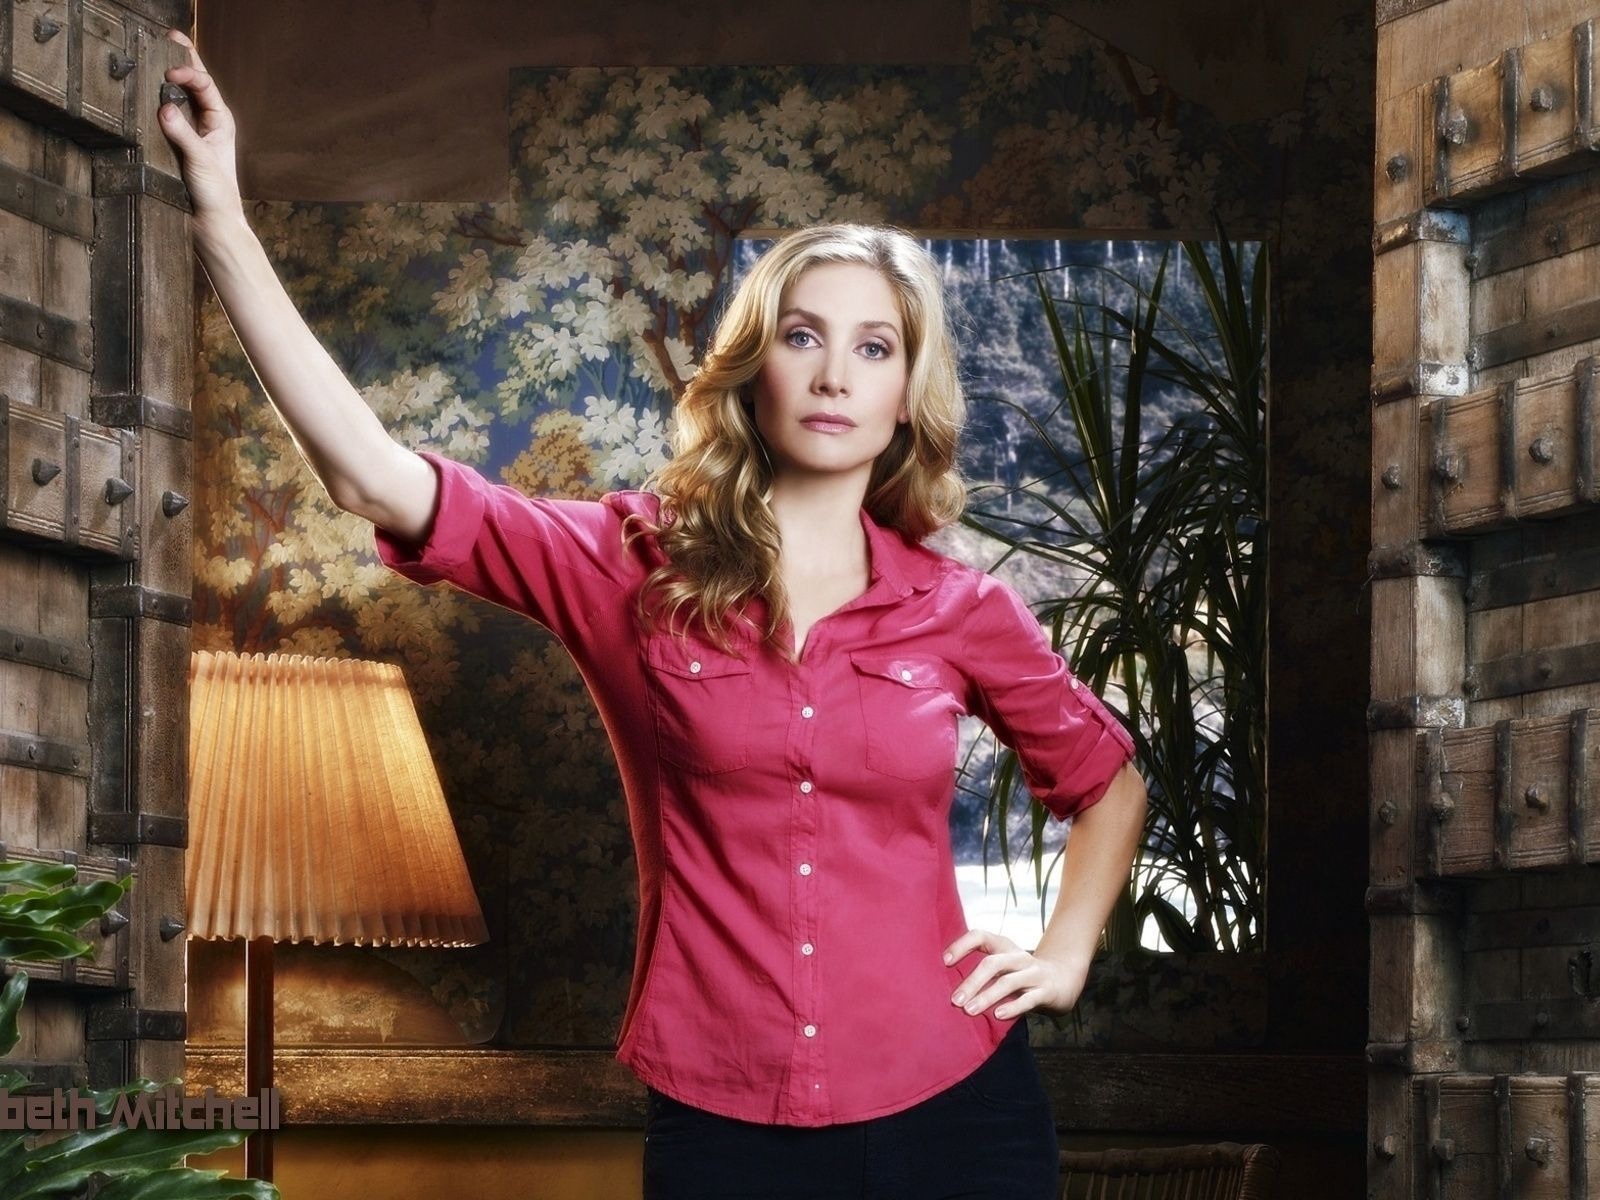 Elizabeth Mitchell #006 - 1600x1200 Wallpapers Pictures Photos Images